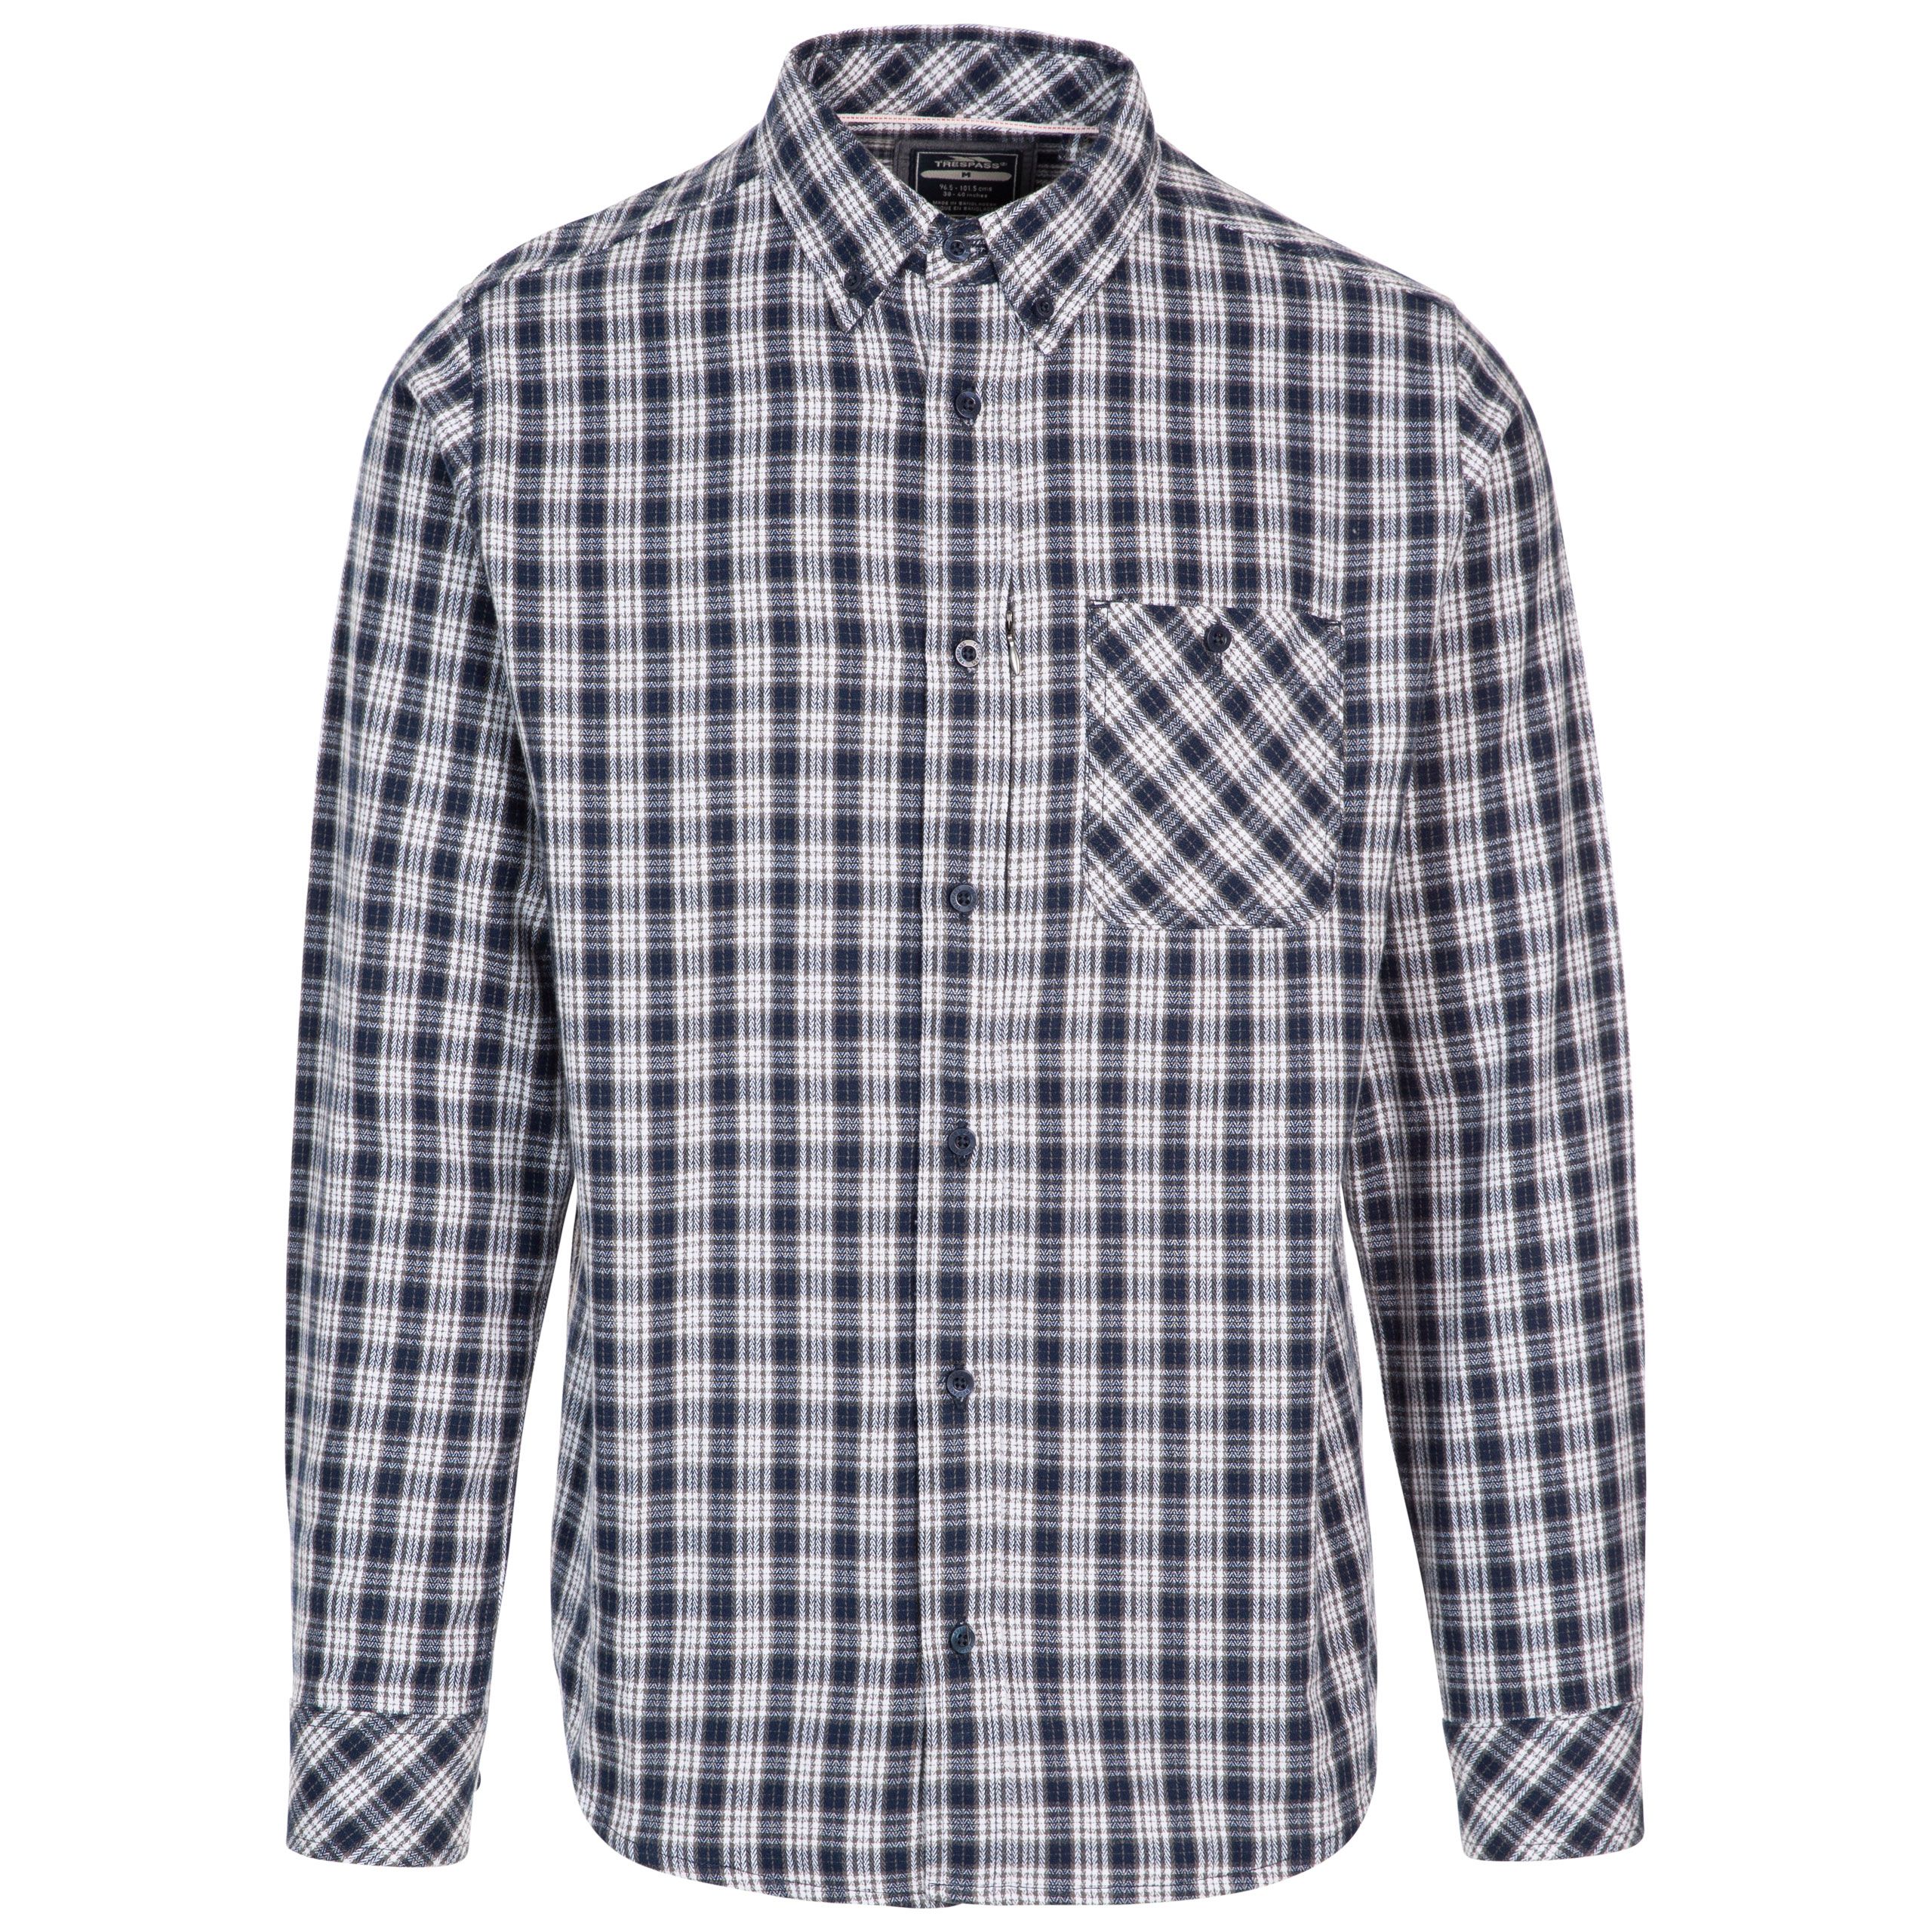 Trespass Mens Checked Shirt Concealed Zip Pocket Panncross